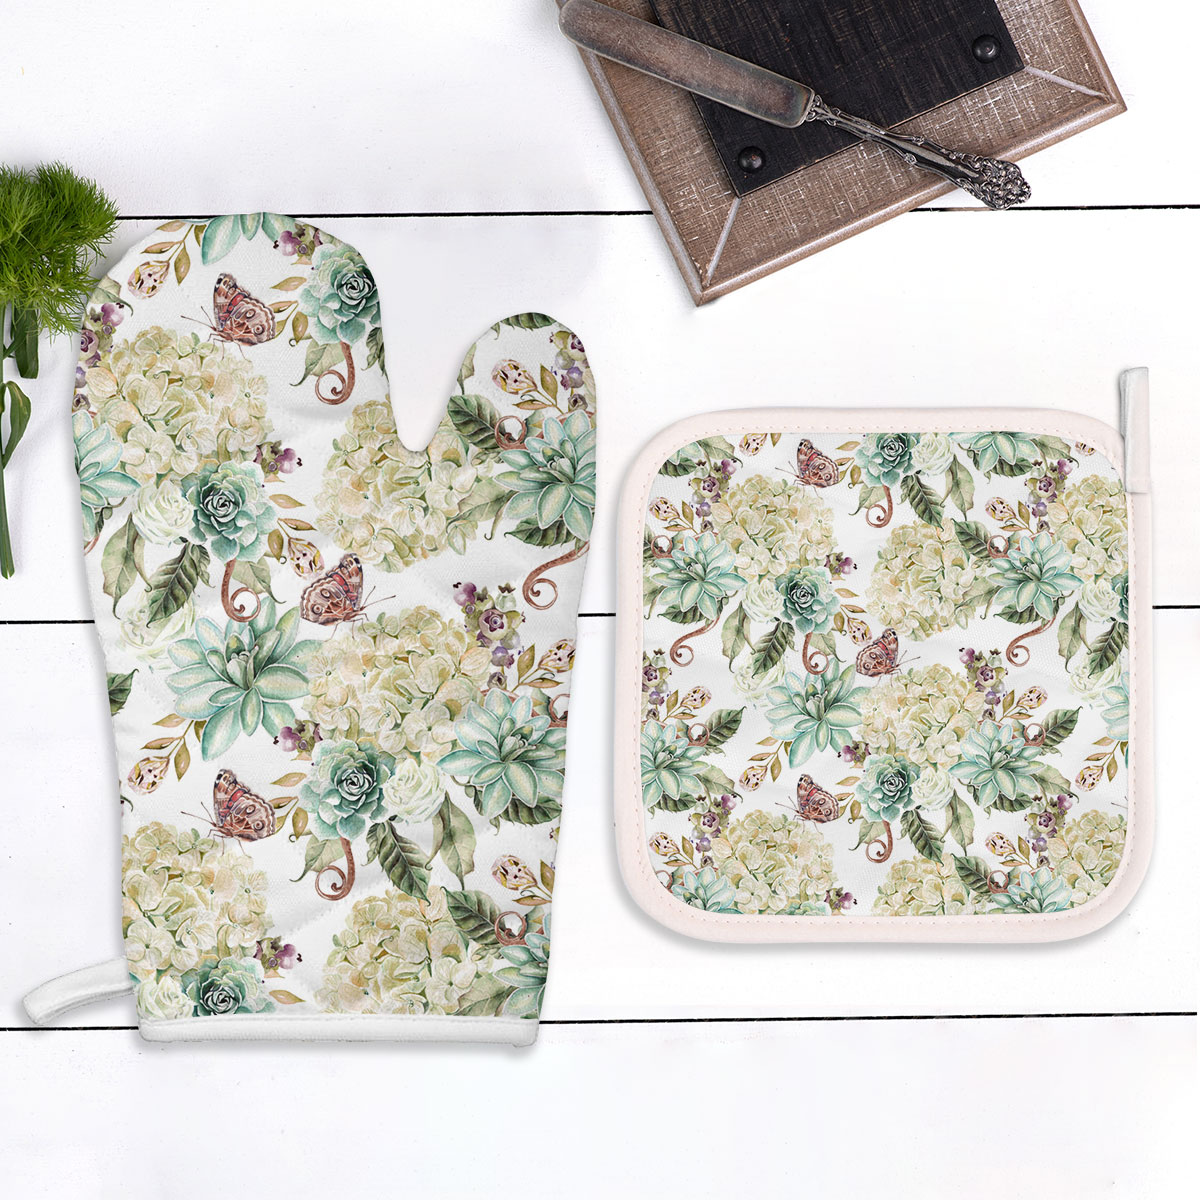 Bright Watercolor With Flowers Hydrangea, Rose And Succulents Oven Mitts Pot Holder Set